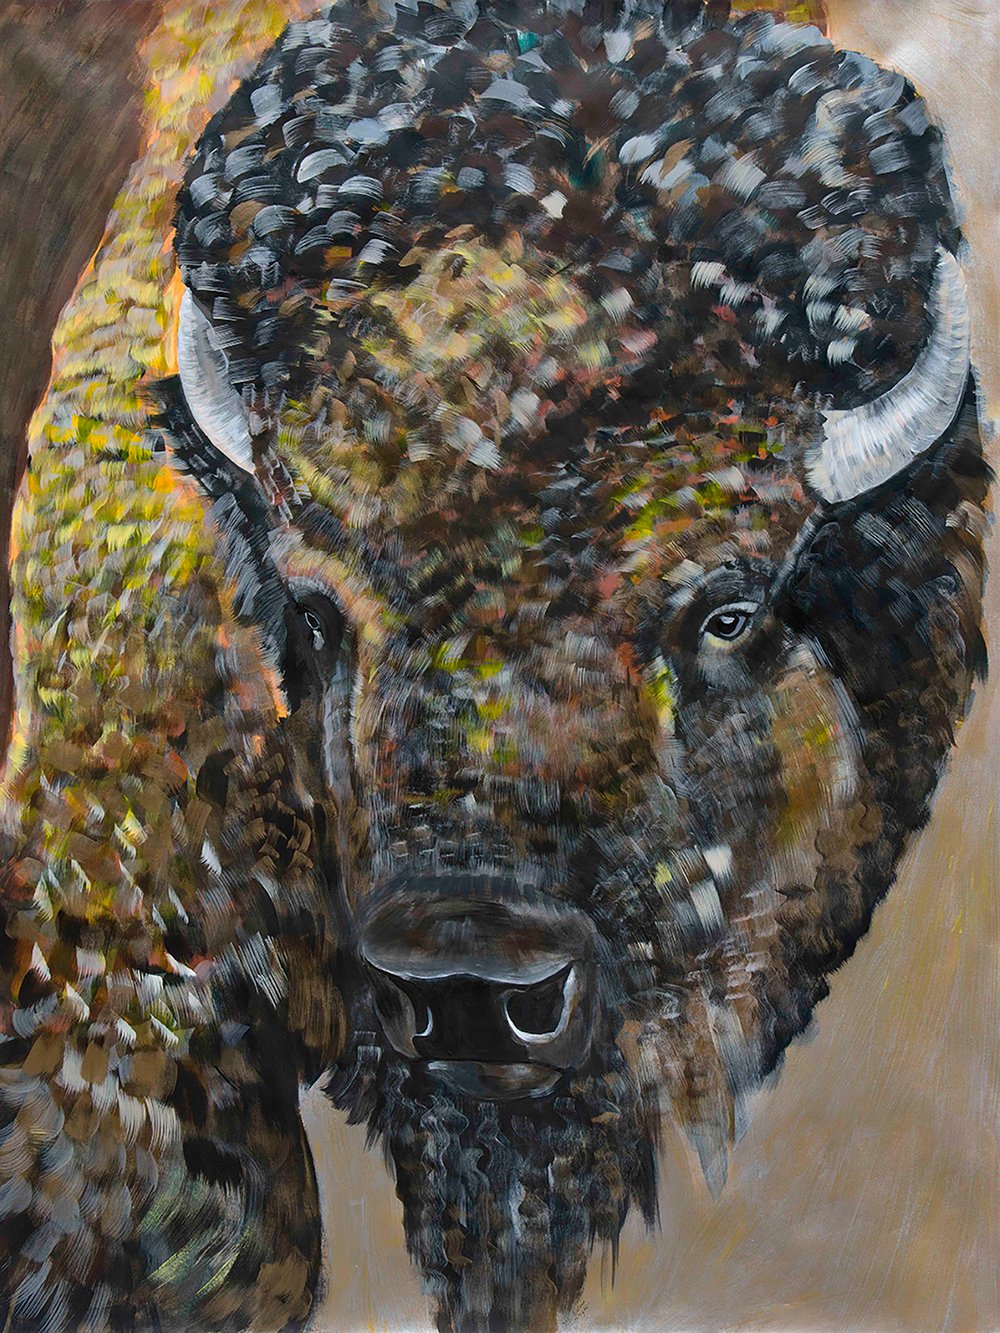 Image of Fine Art Giclee print reproduction of original Bison/Buffalo painting by Natalie Wright